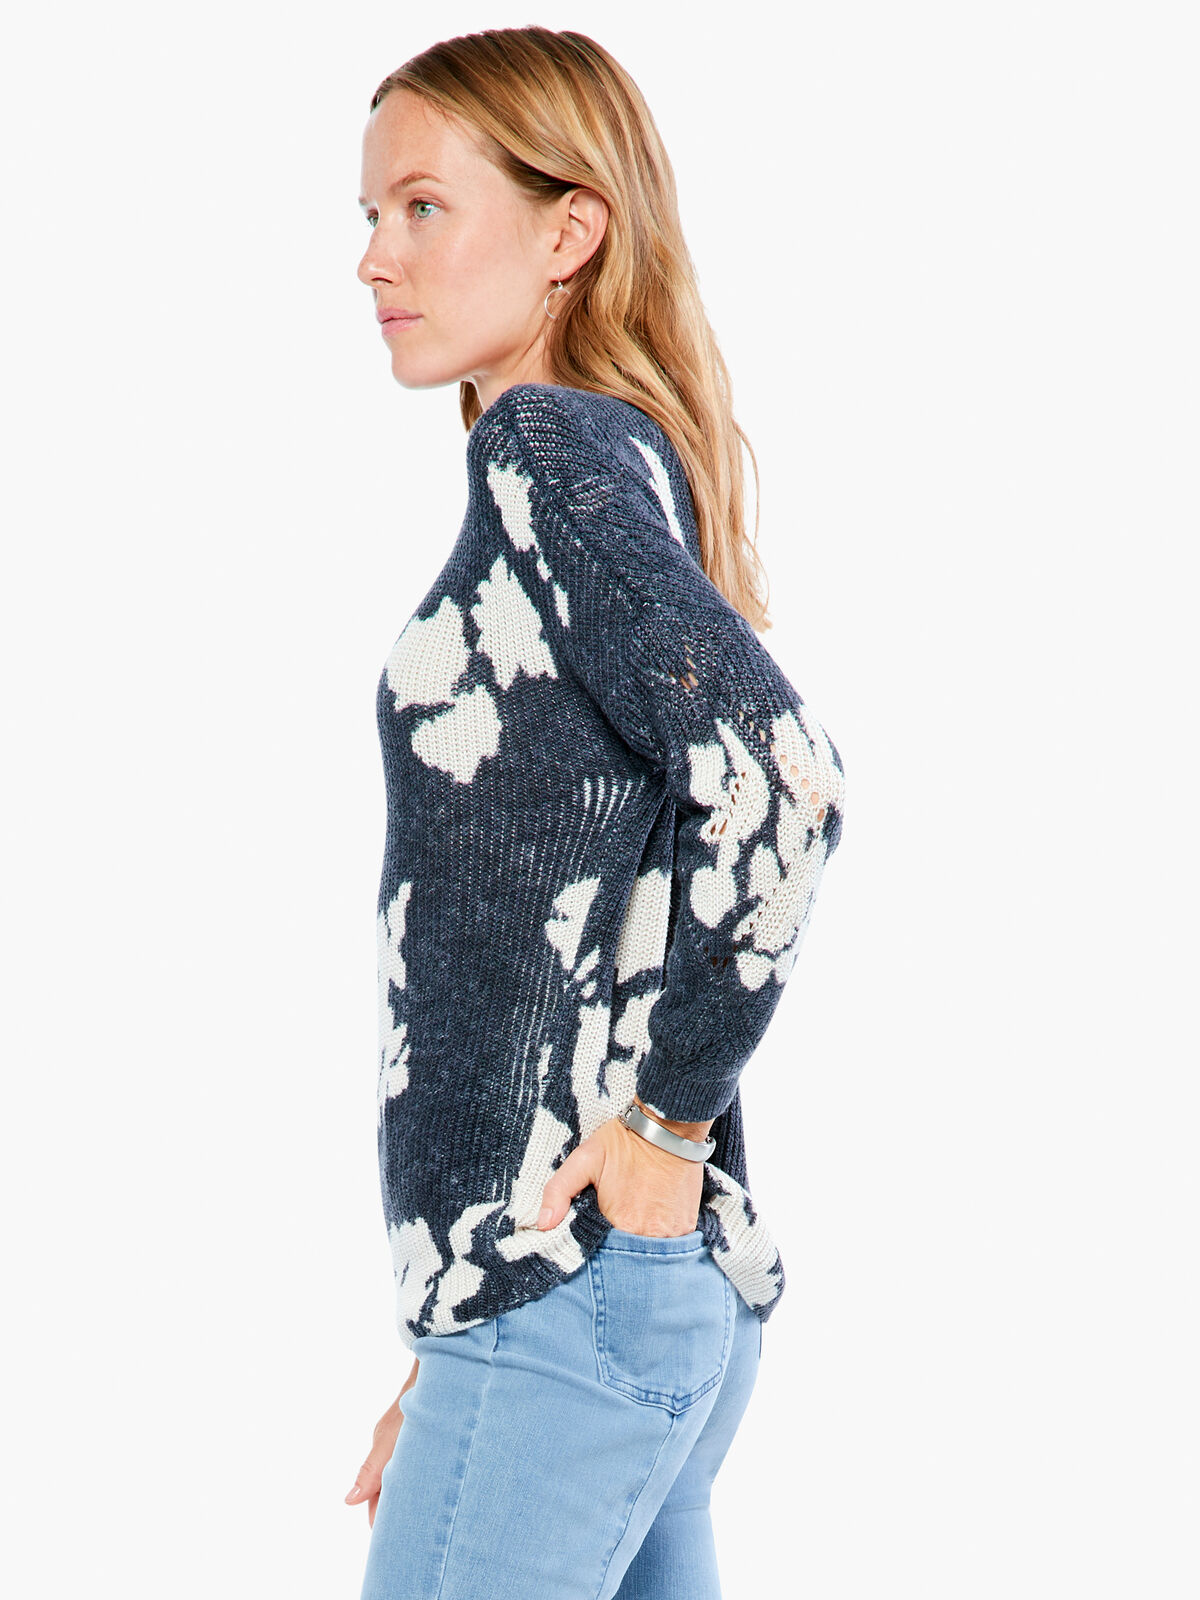 Scattered Florals Sweater